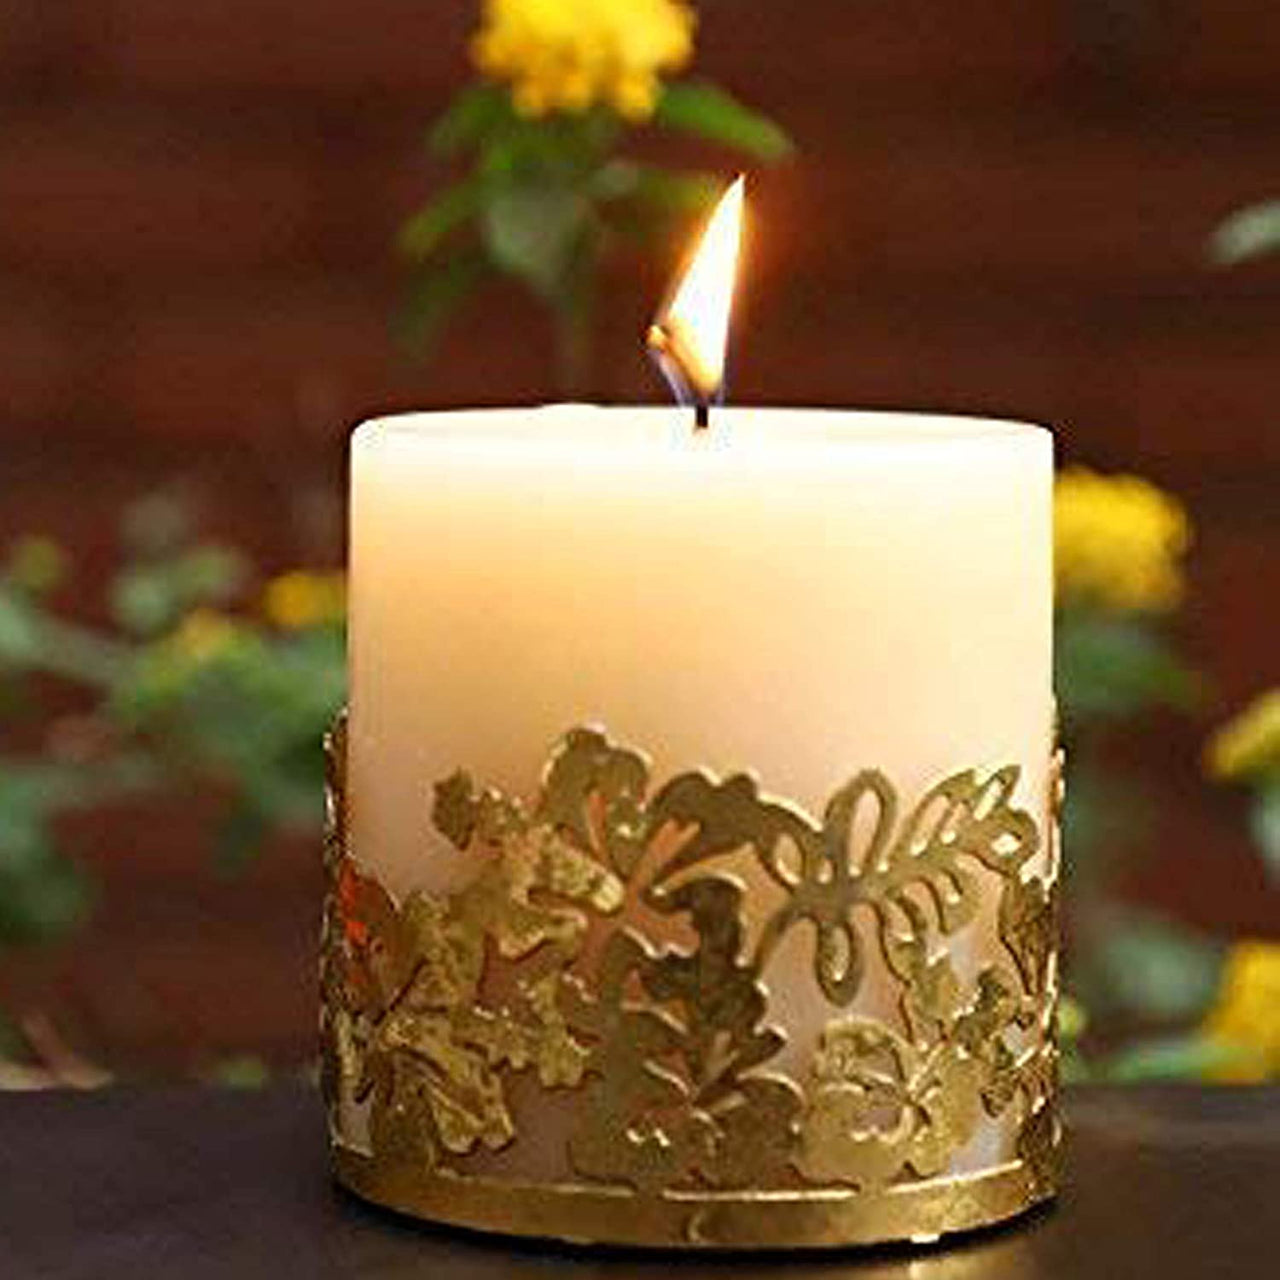 Fiesta Candle Holder with Scented Candles - Decorative Candle Gift Set